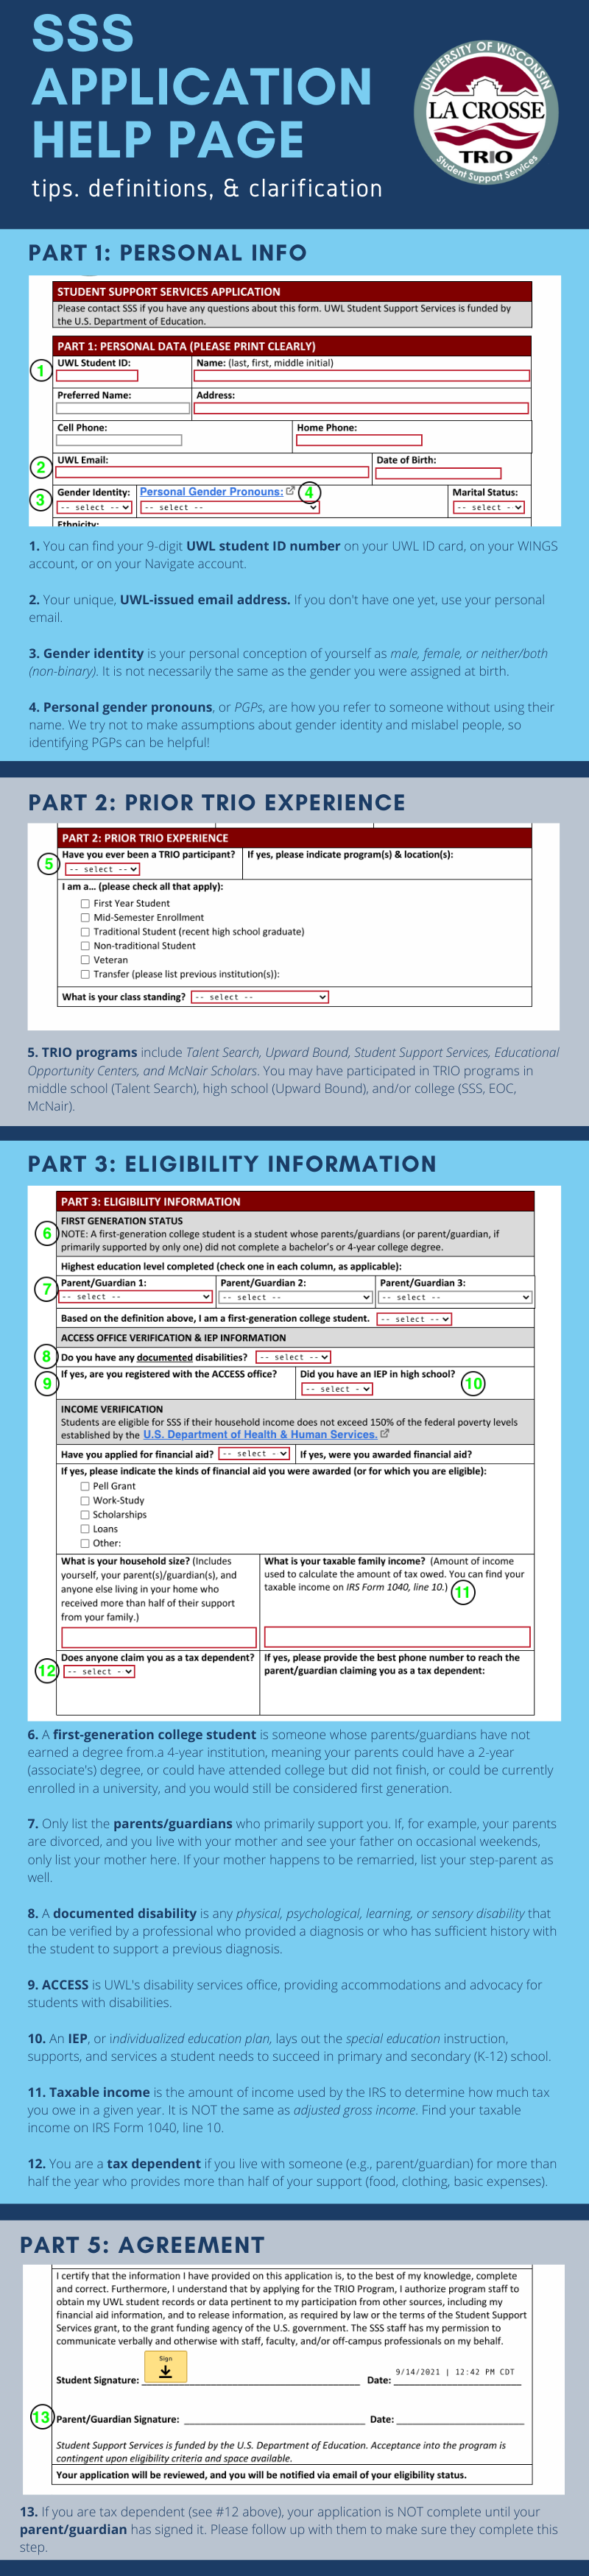 Infographic: Tips, definitions, and clarifications for completing SSS application